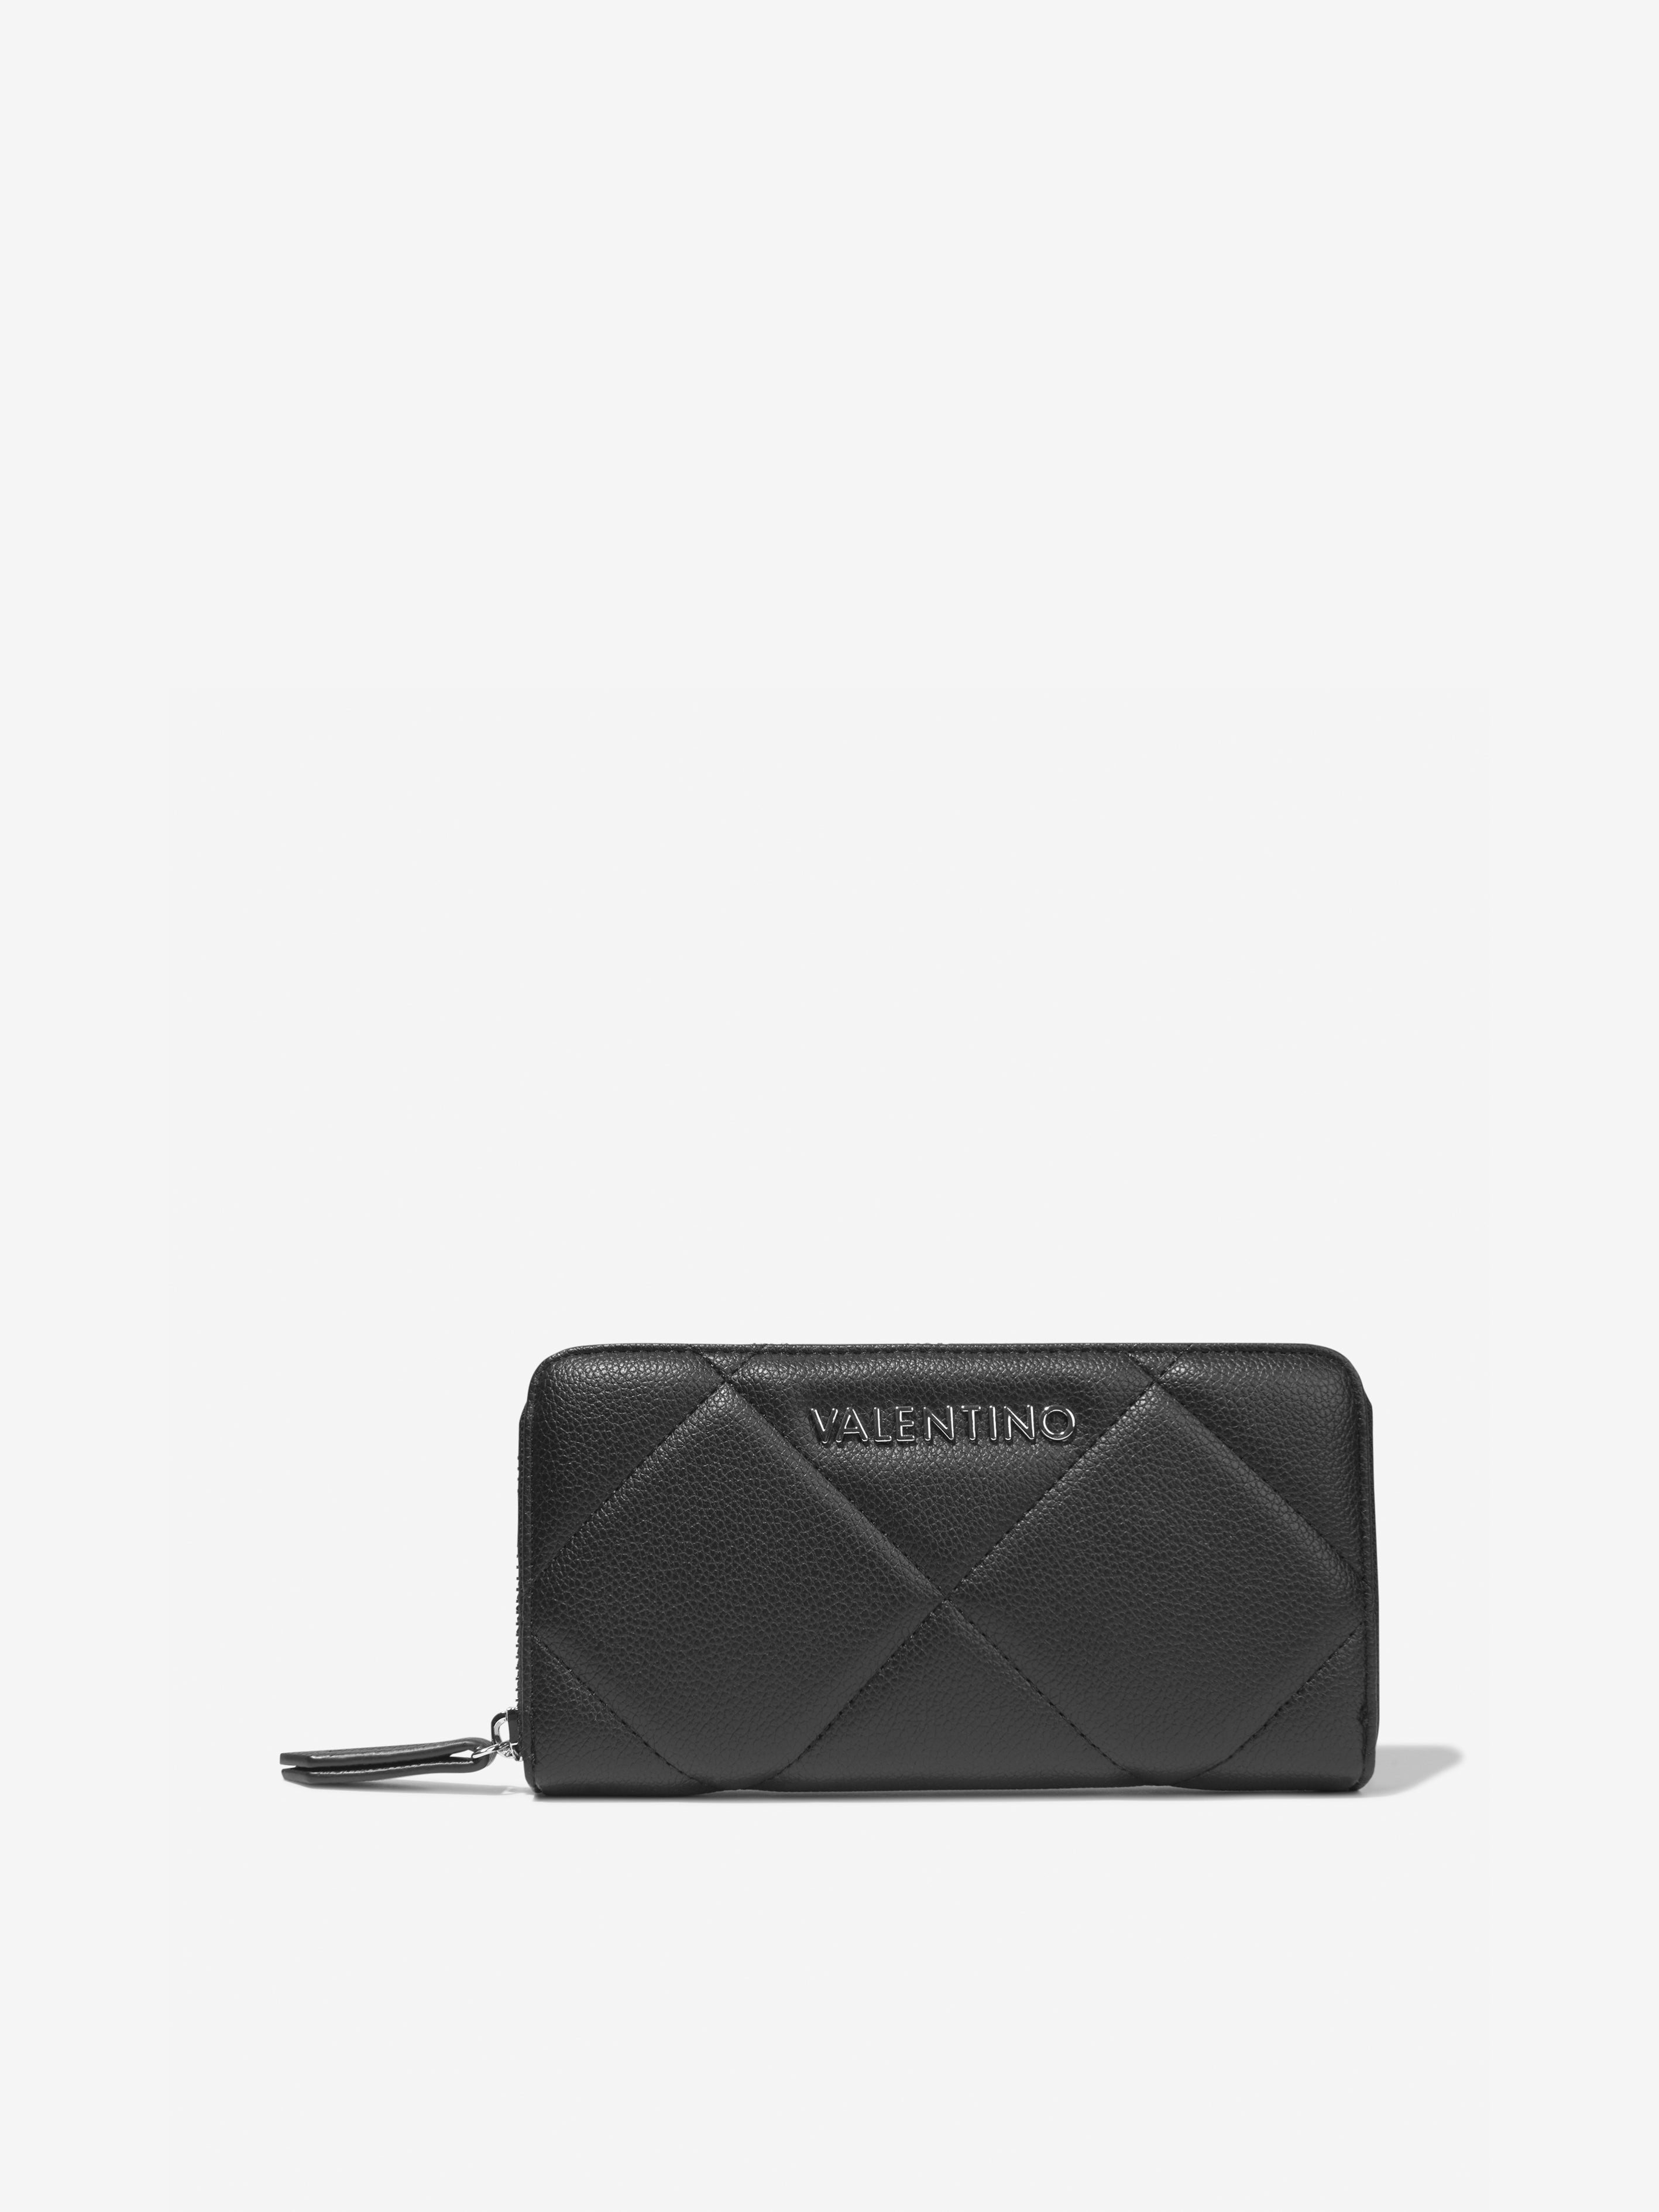 Girls Cold Re Wallet In Black (W: 2.5cm) | Childsplay Clothing